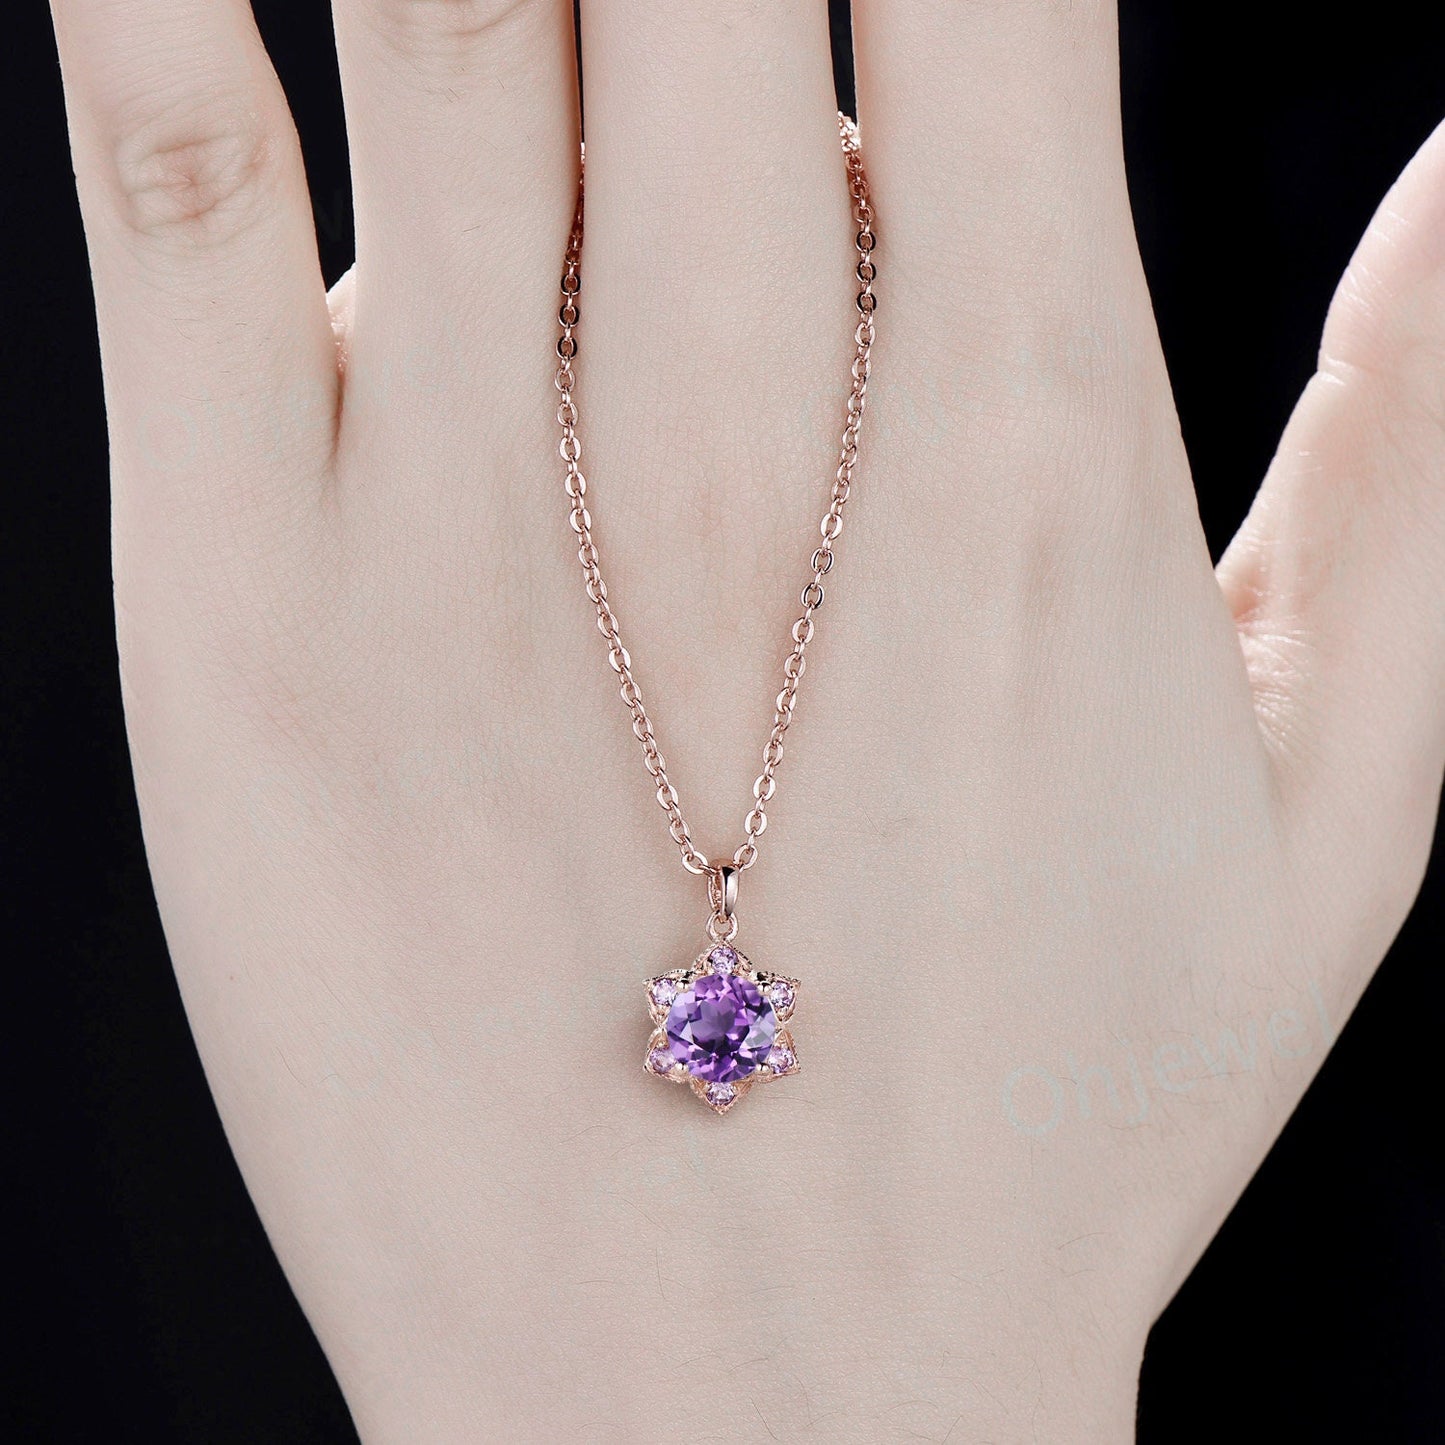 Vintage round purple amethyst necklace art deco milgrain floral unique Pendant women solid 14k rose gold crystal anniversary gift for her